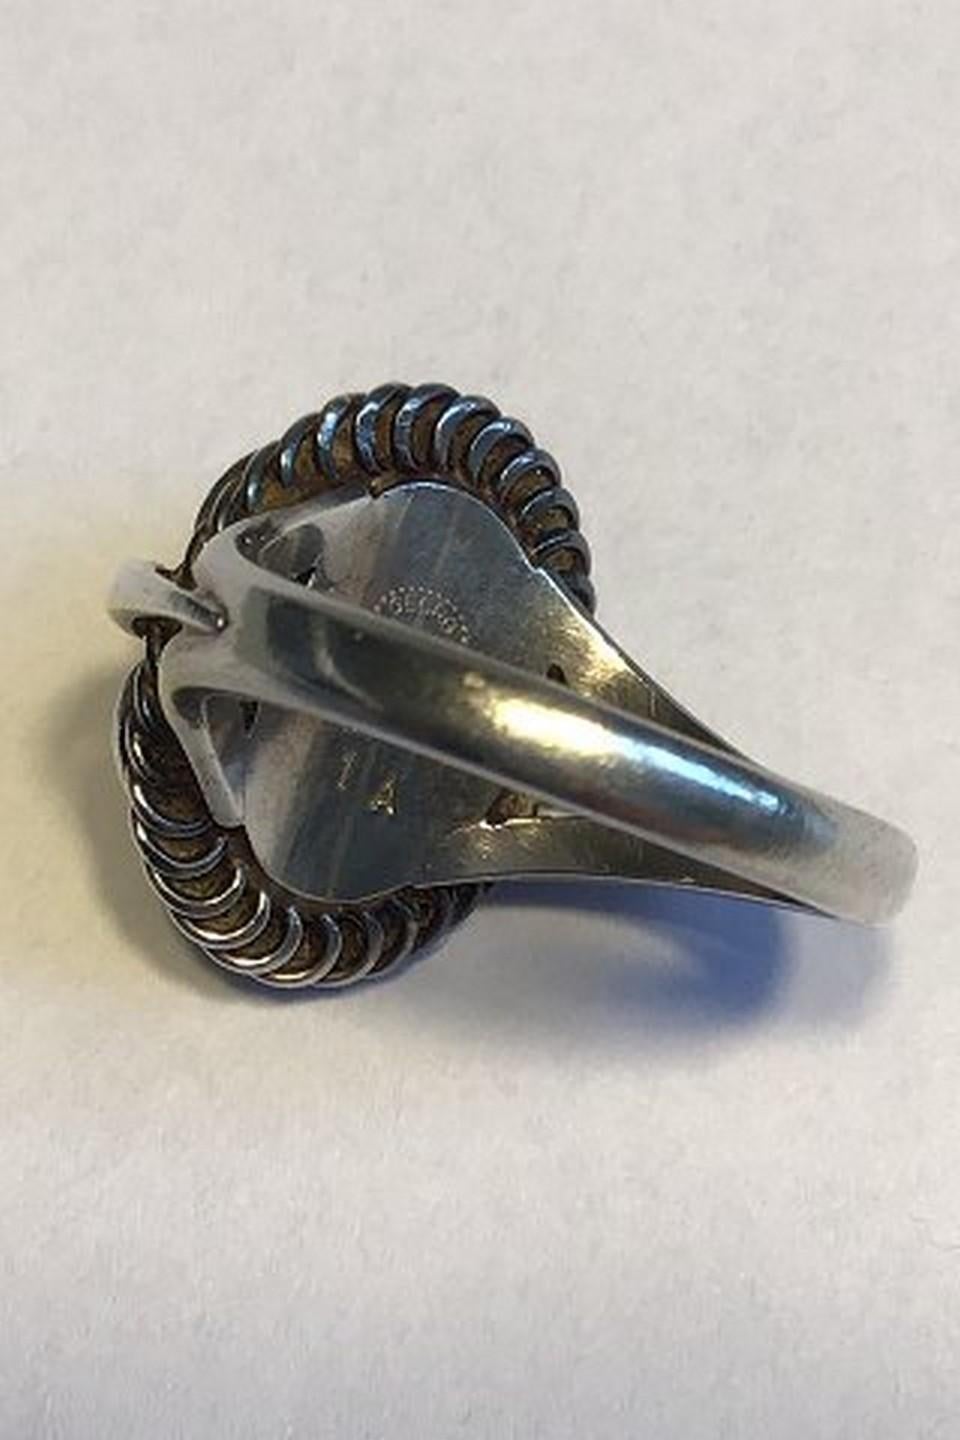 Georg Jensen Sterling Silver Ring No 1A. Made after 1945. Ring Size 56 / US 7 1/2. Weighs 6.6 g / 0.23 oz.